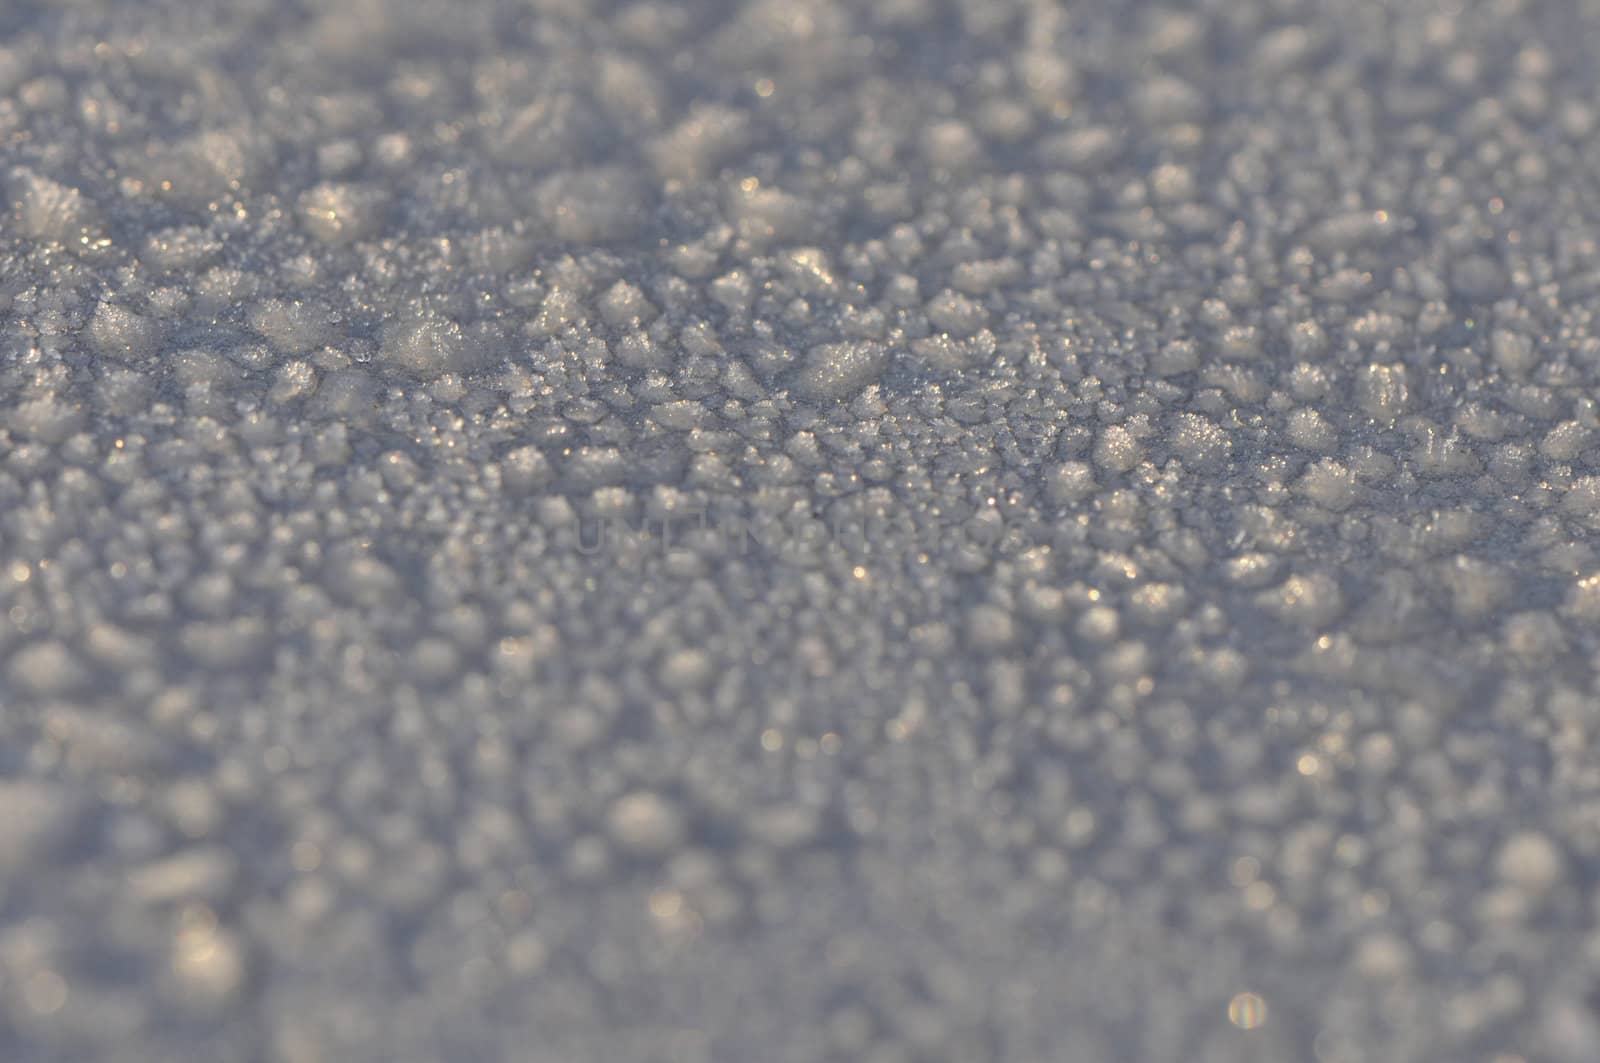 Abstract view of frost on a flat surface